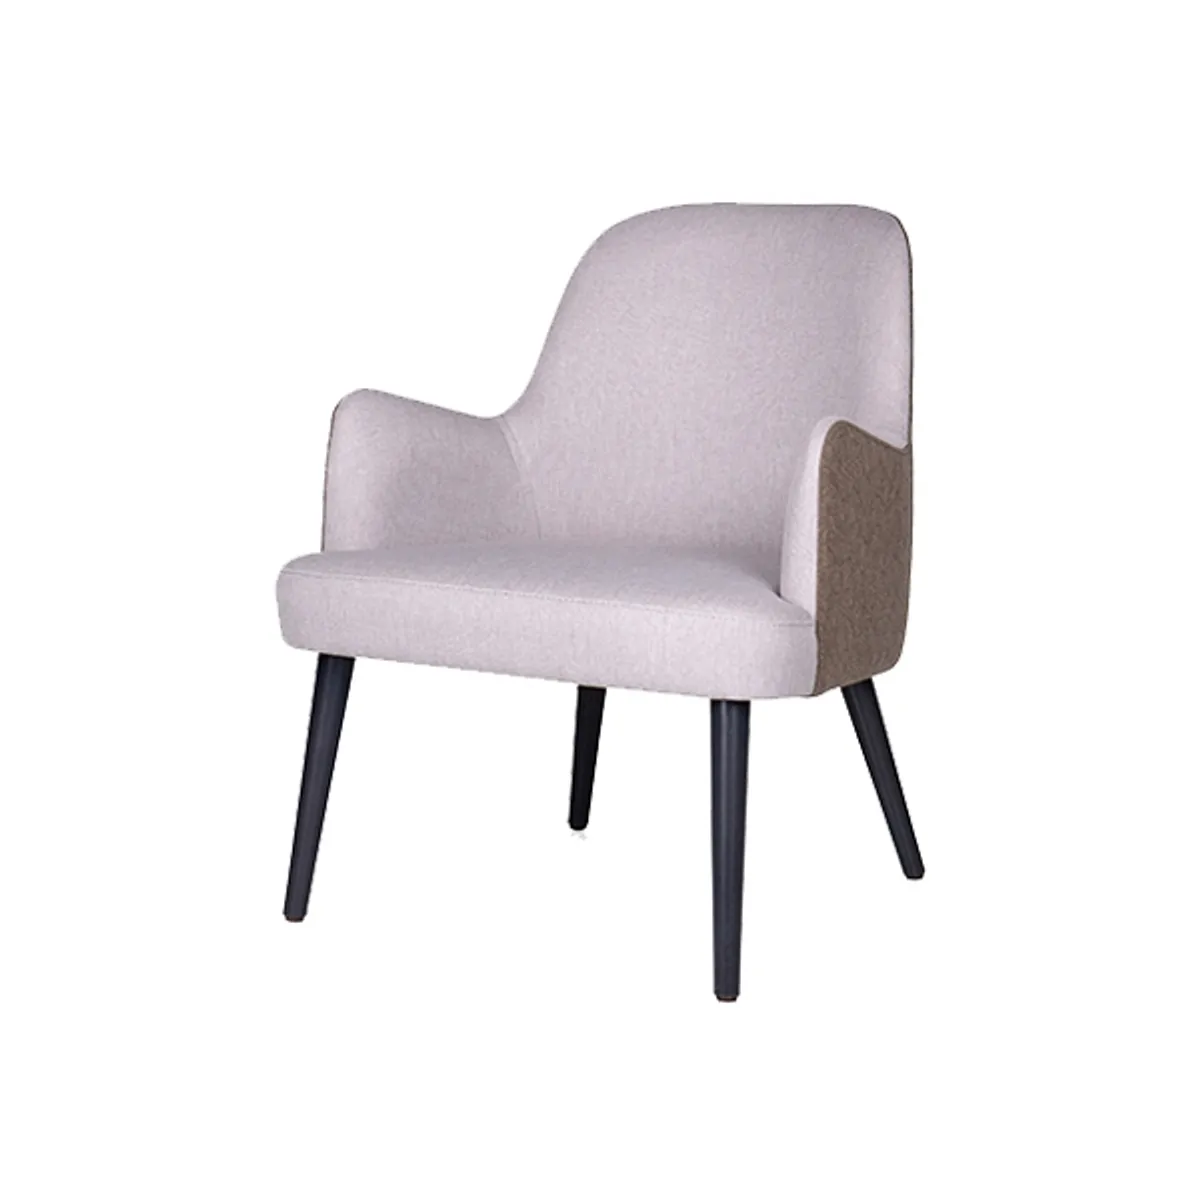 Kelly Mass Armchair Inside Out Contracts2